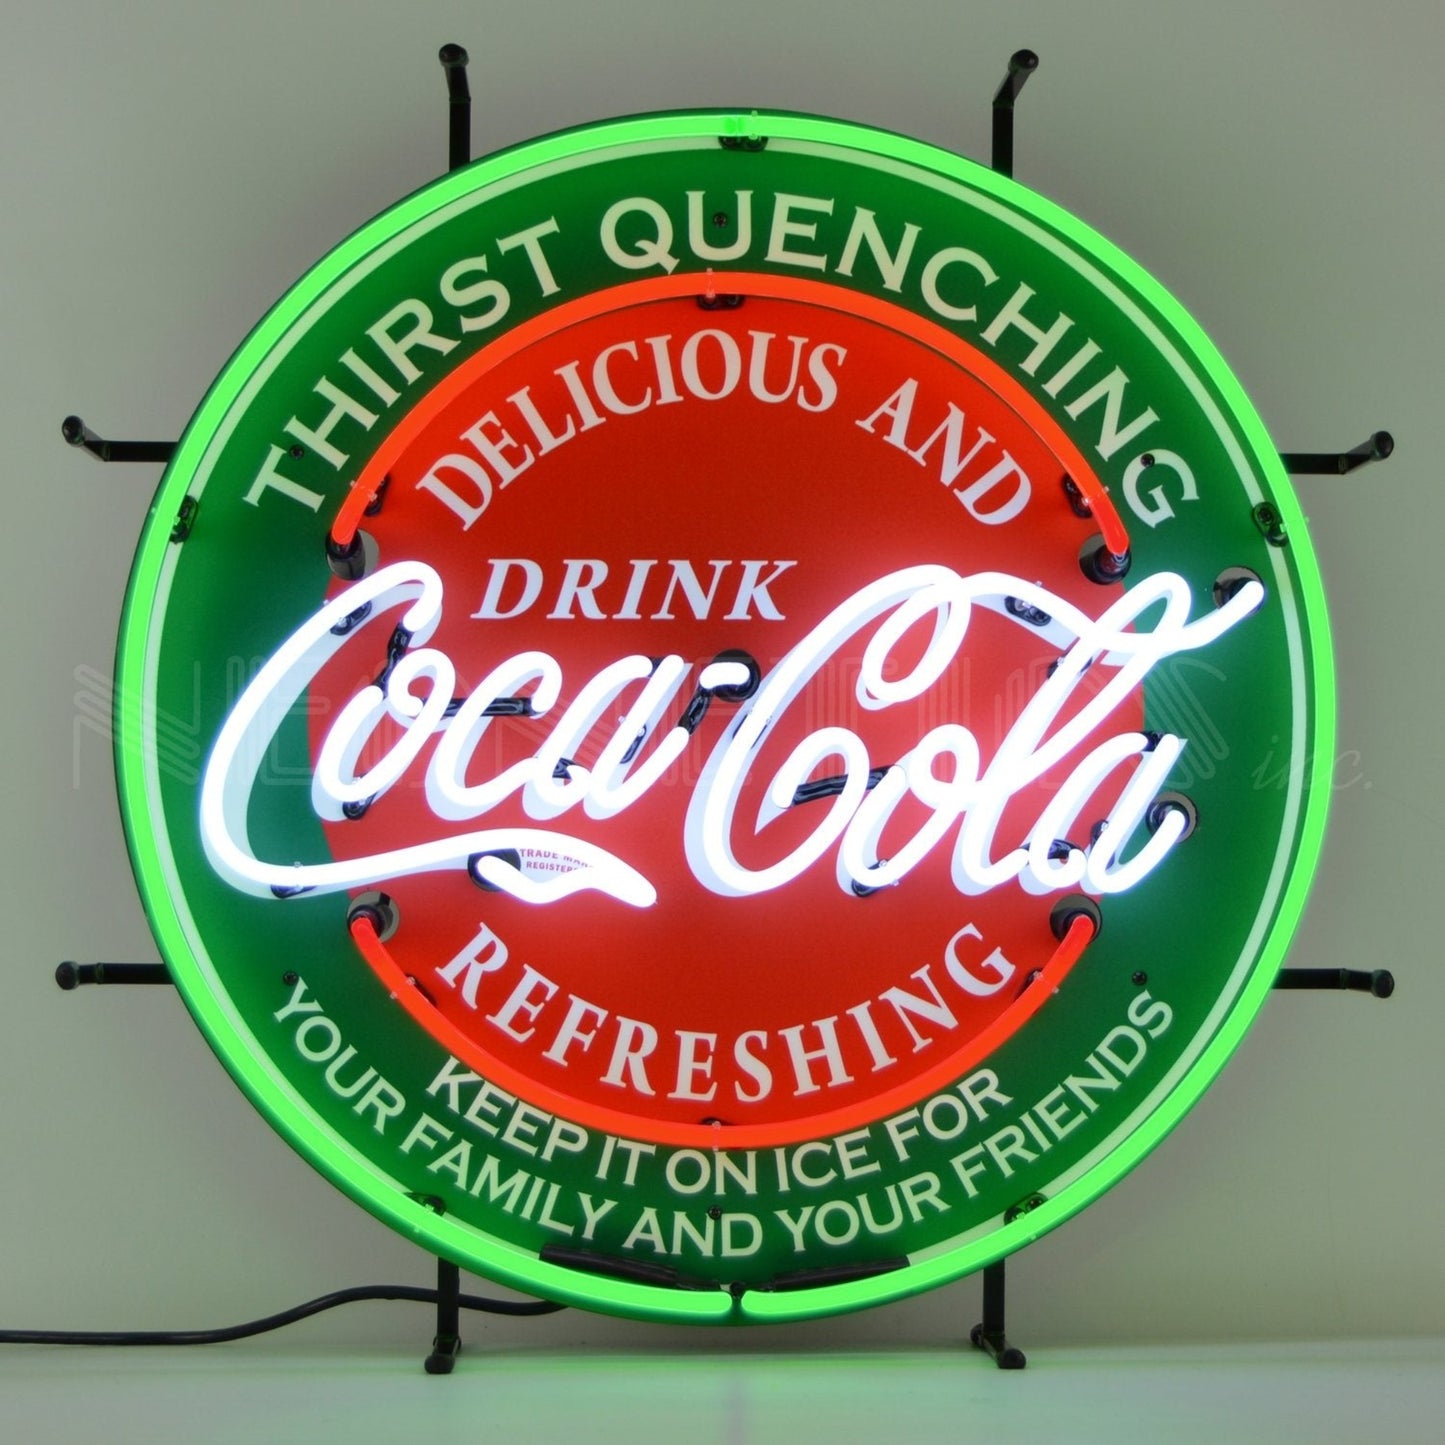 Coca-Cola Evergreen neon sign with slogan and brand logo.